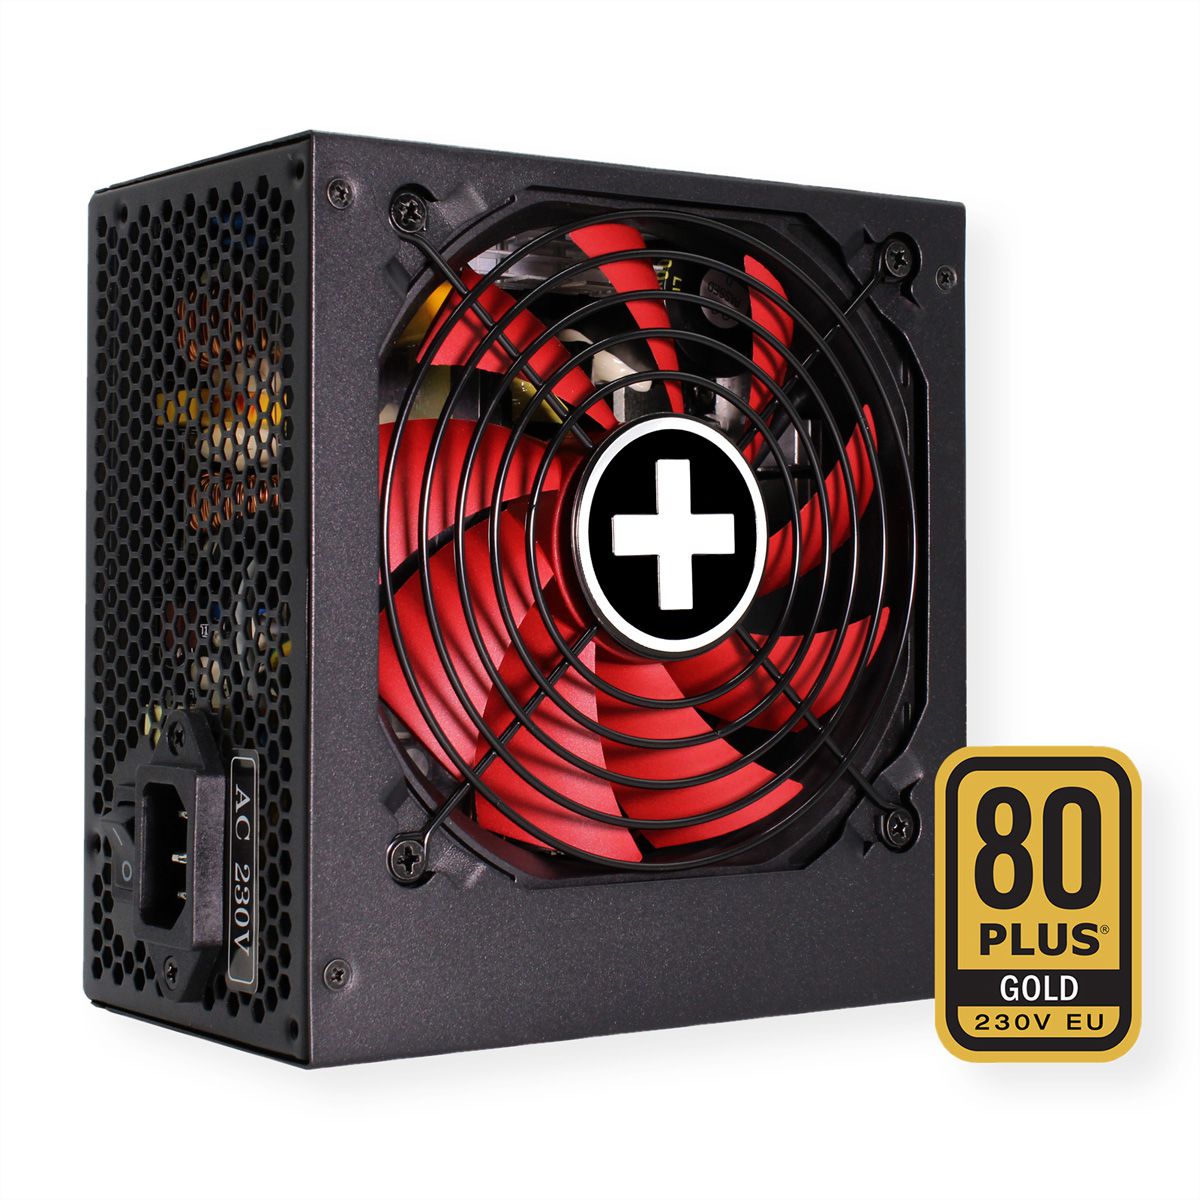 Xilence XP550R9 550W Alimentation PC, 80+ Gold, Gaming, ATX - SECOMP France